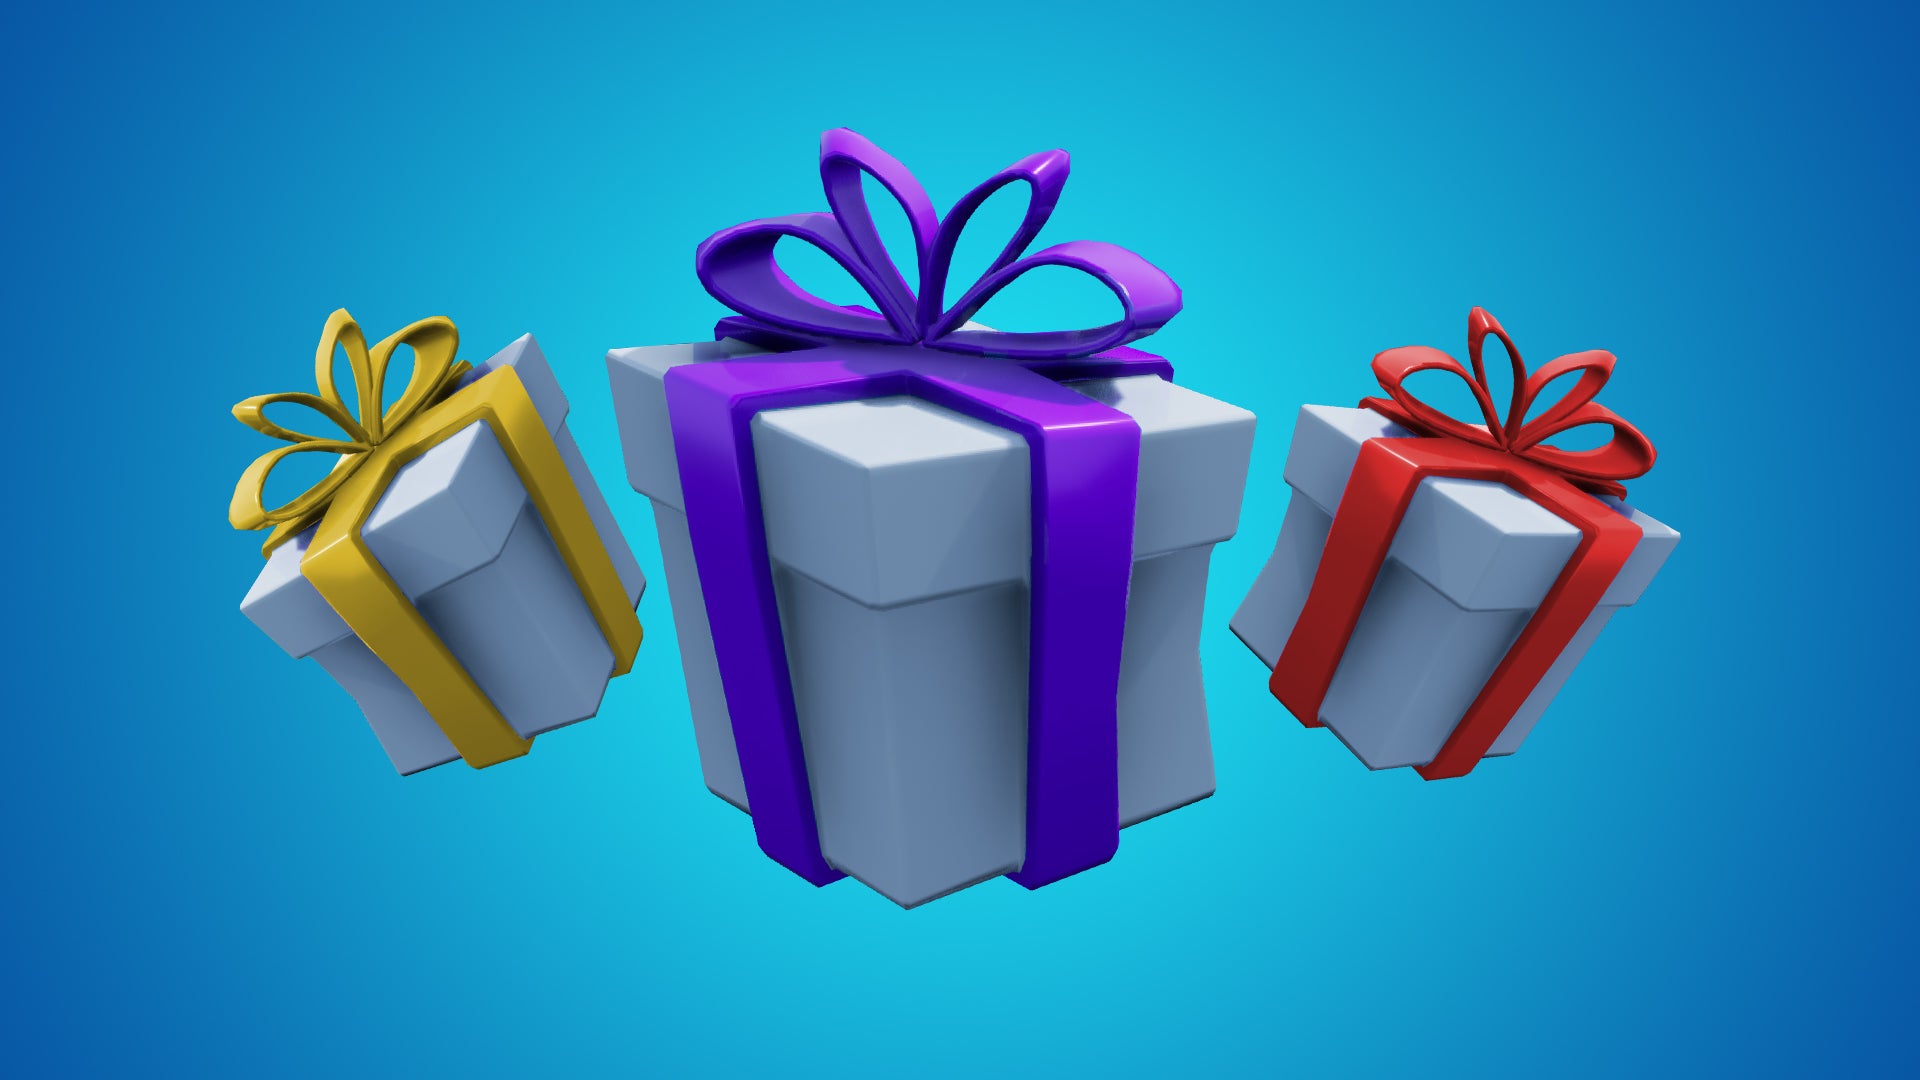 Image for Fortnite Season 9 could get Battle Pass gifting according to dataminers